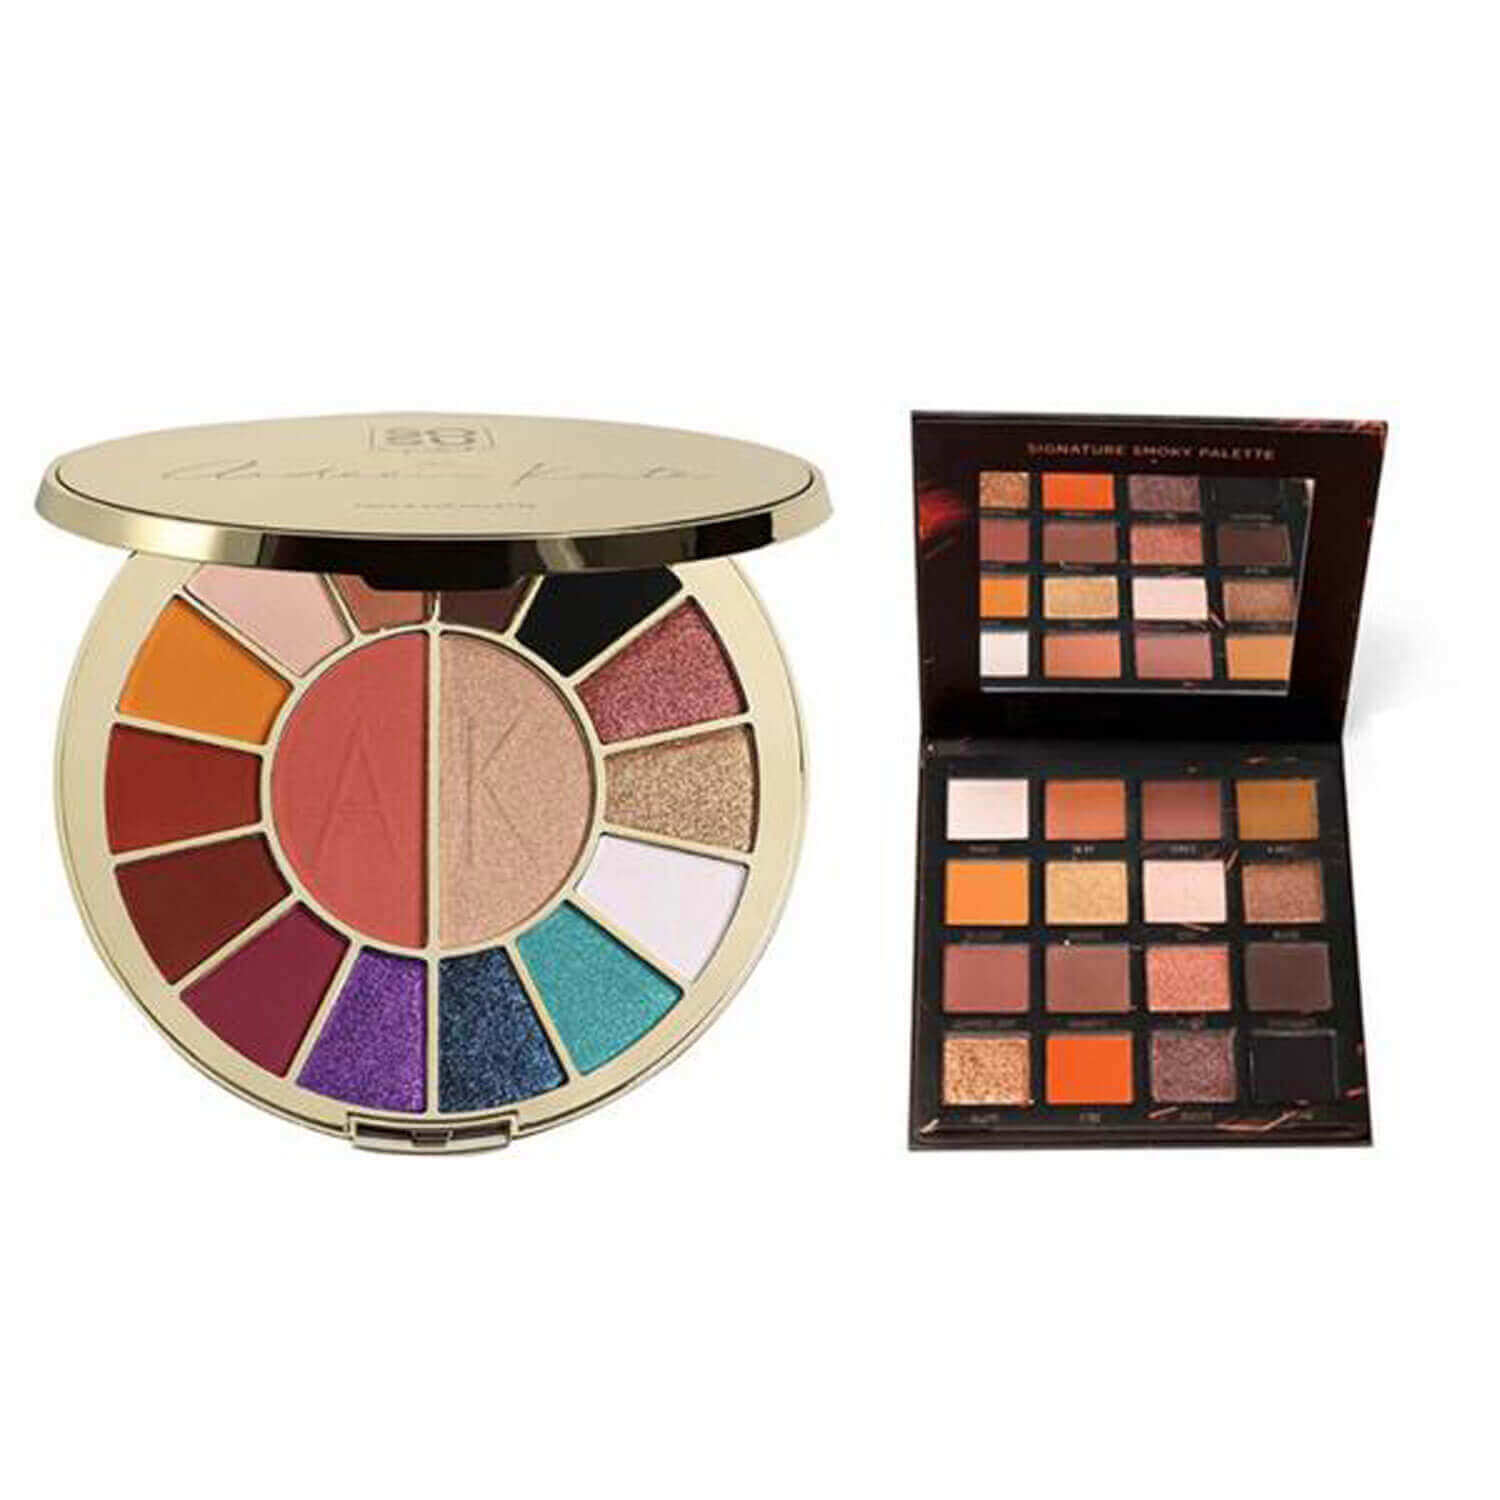 Sosu 2 Palette Bundle Aideen Kate + Hot Fire 1 Shaws Department Stores